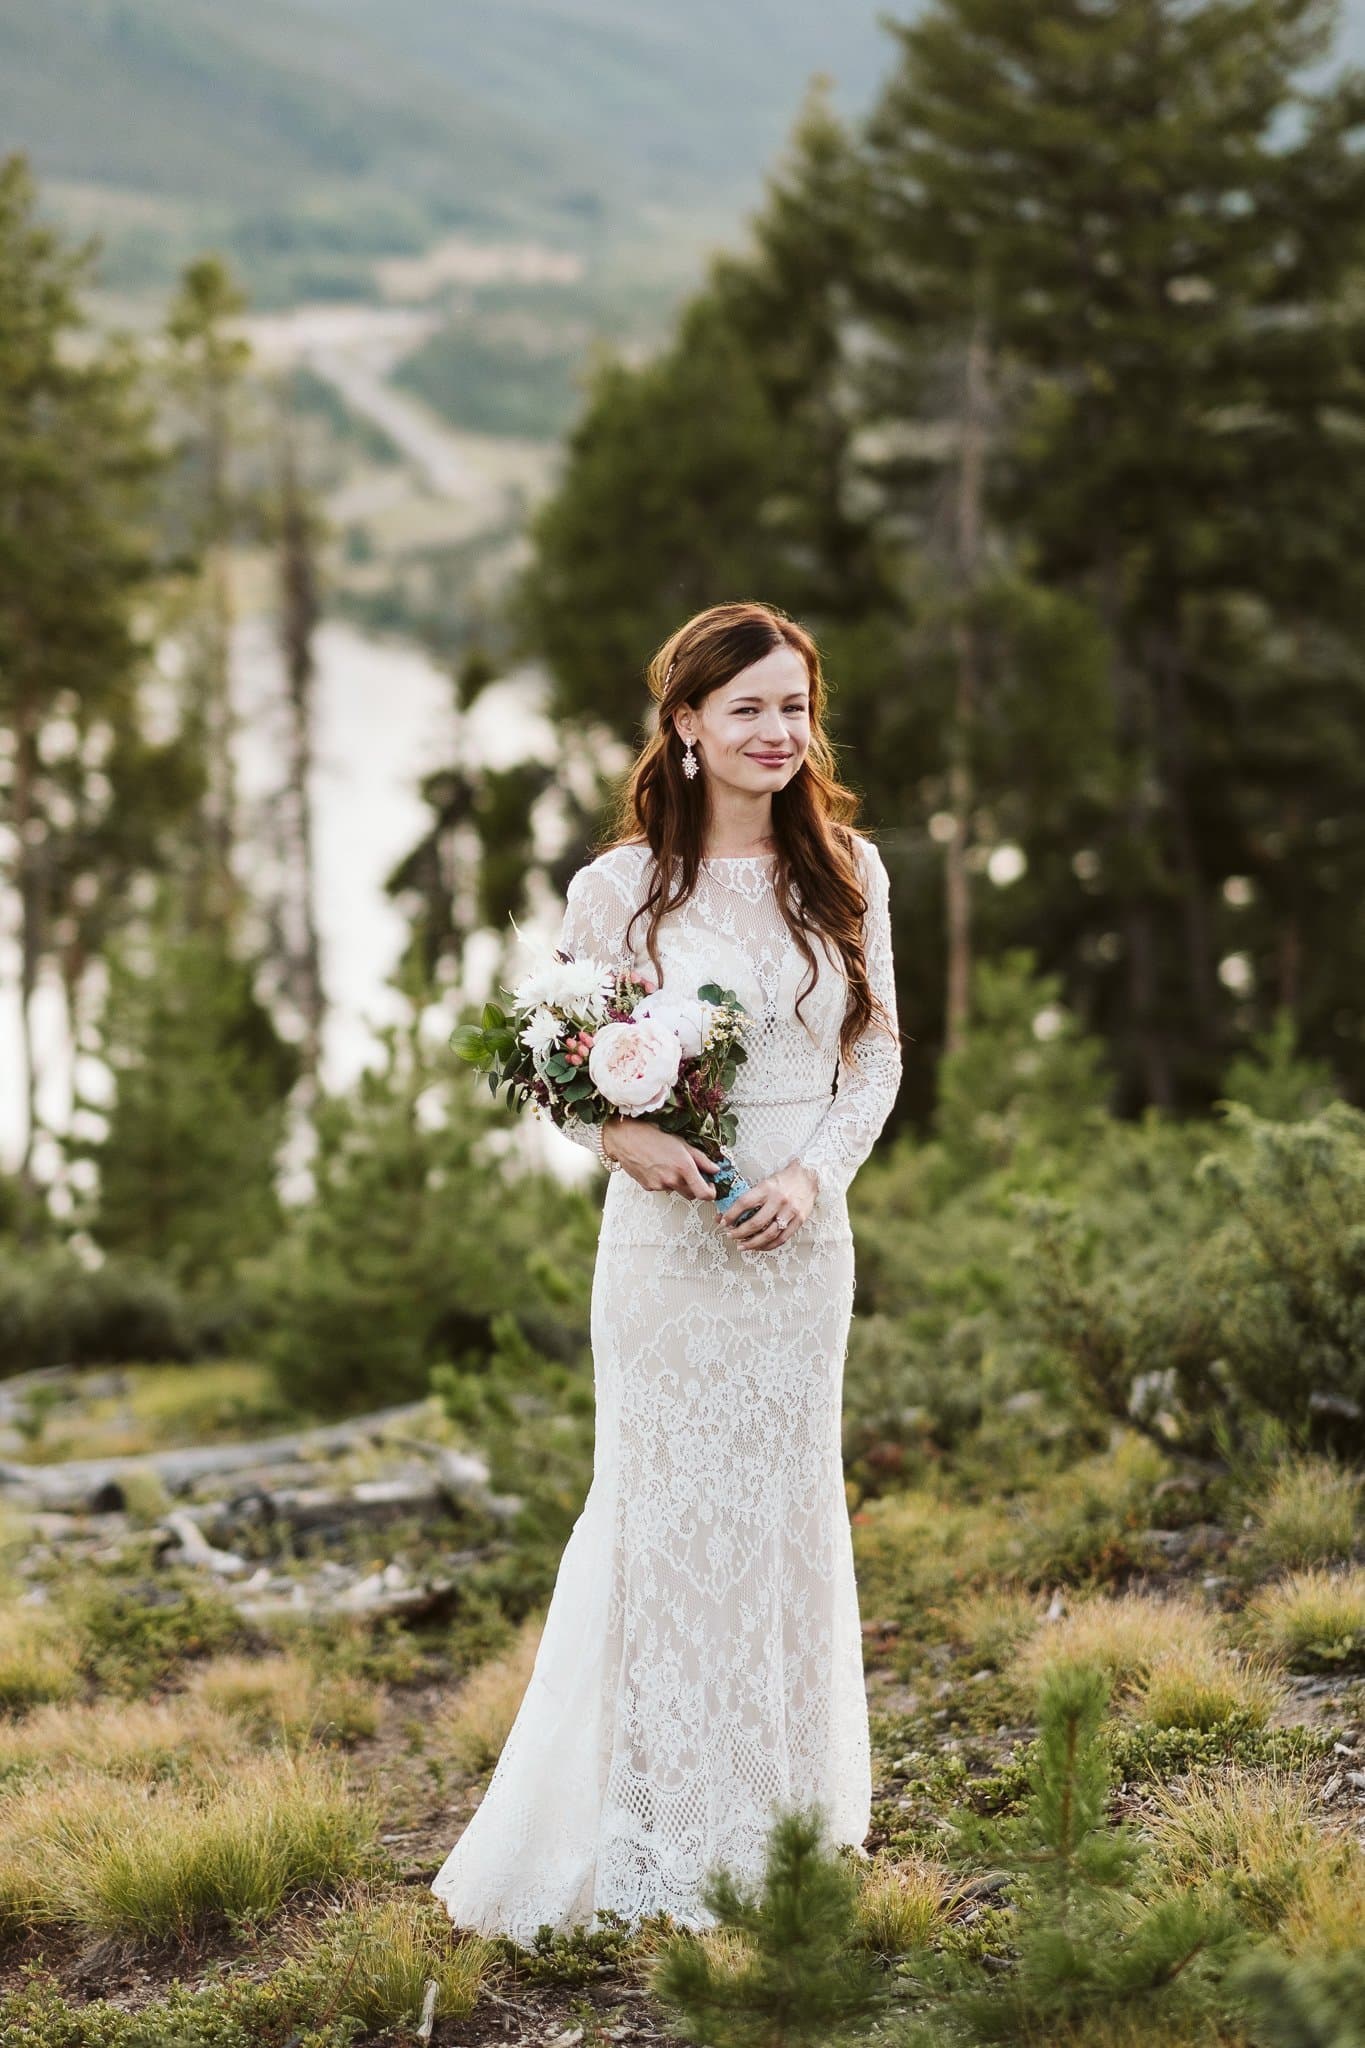 Bridal portraits in the woods, bride wearing Ortiva wedding dress from White One by Pronovias, long sleeve elegant wedding dress